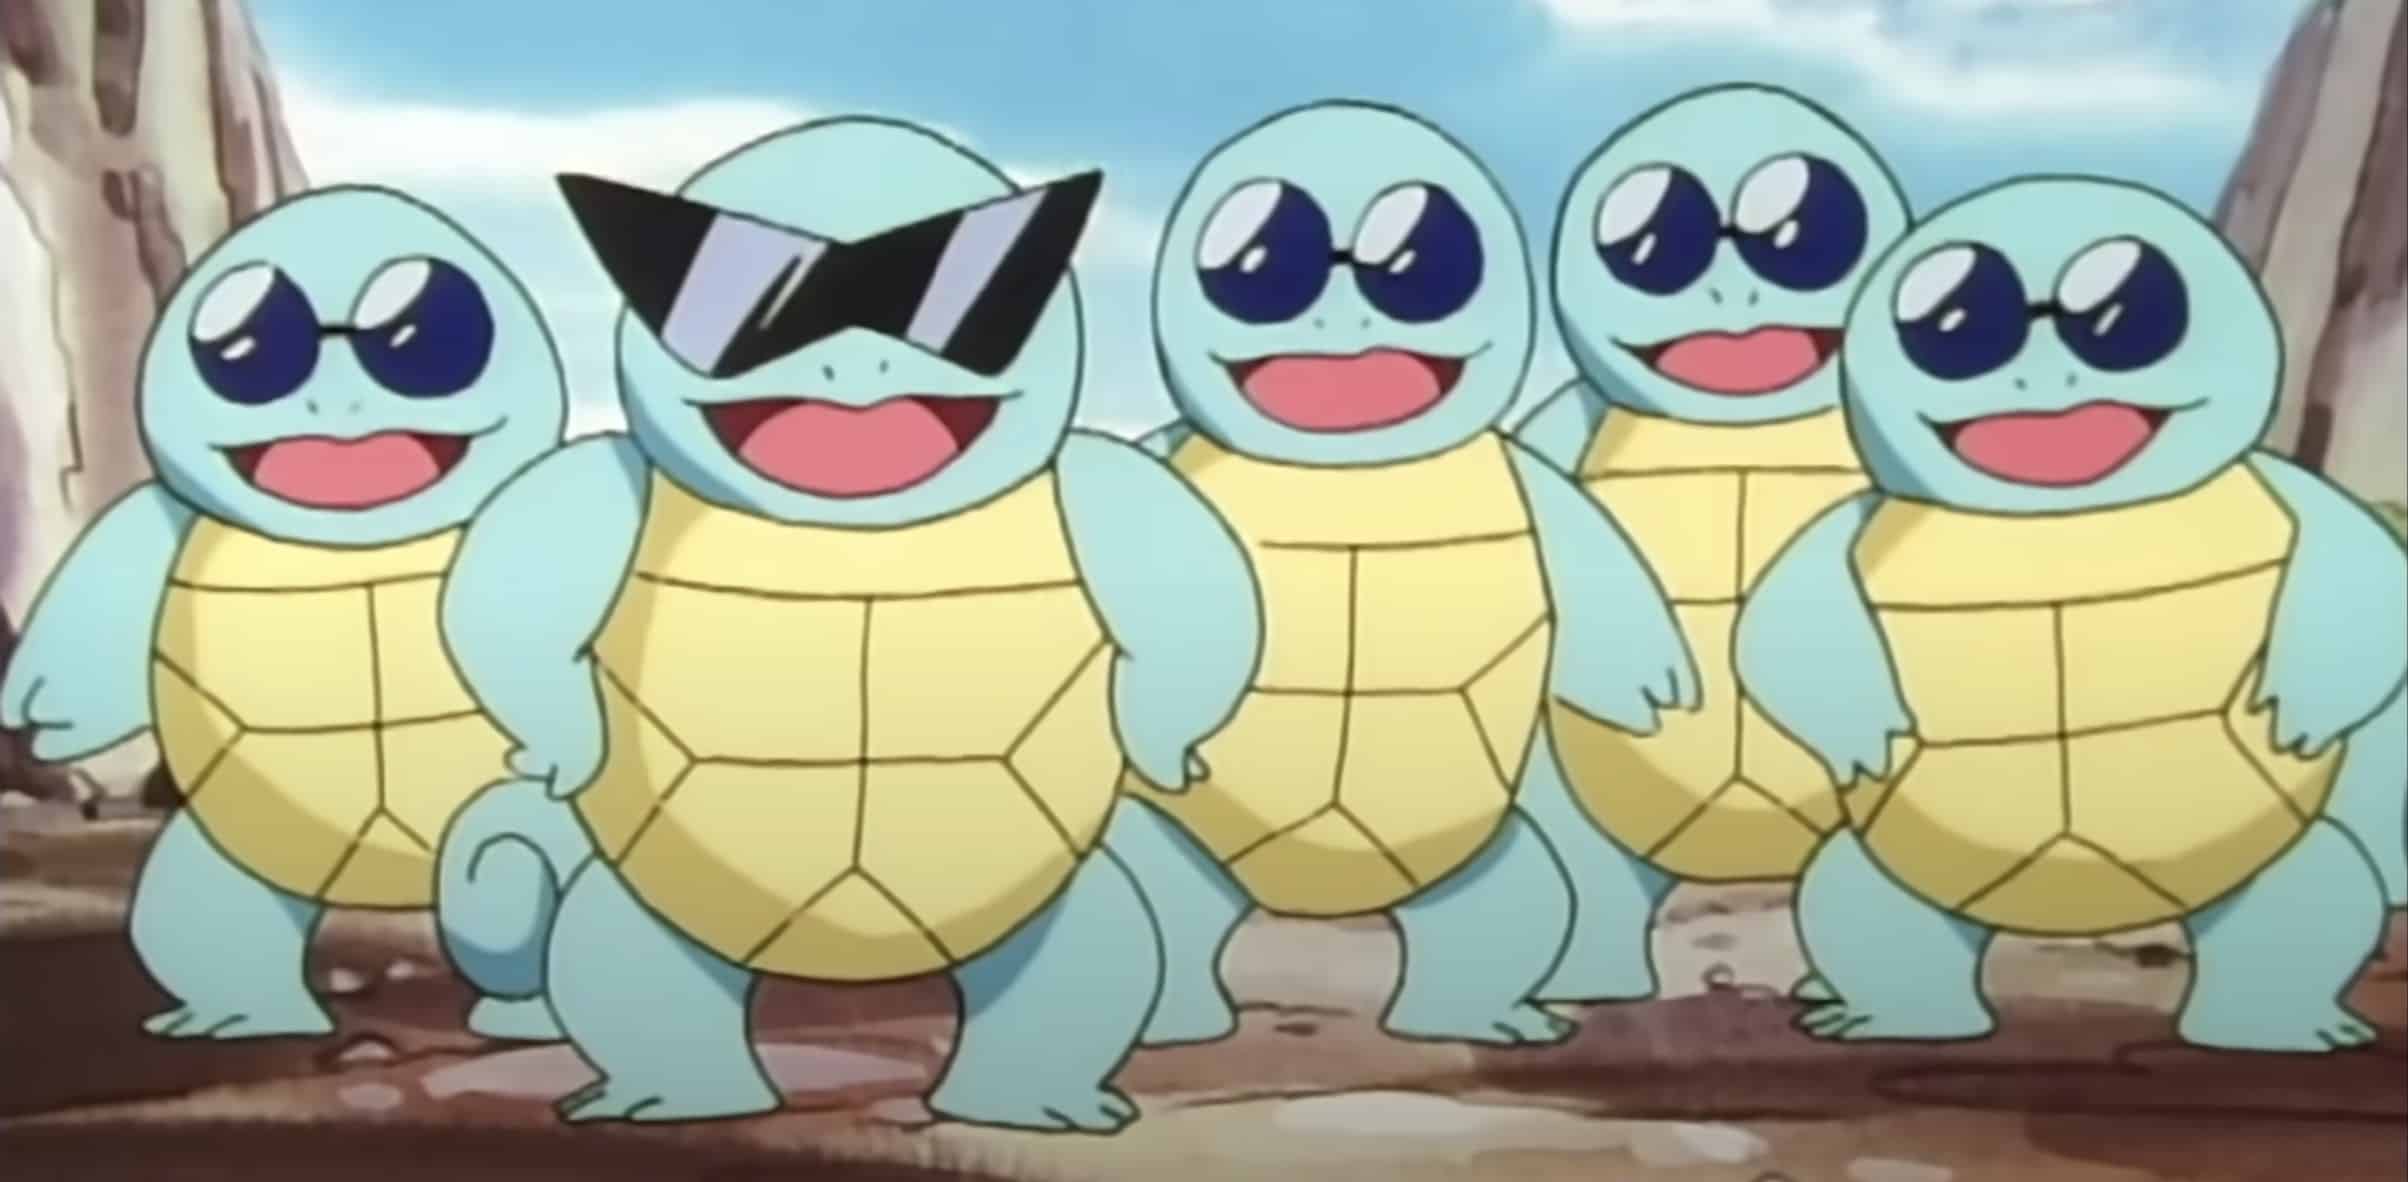 A gang of Squirtles wearing sunglasses